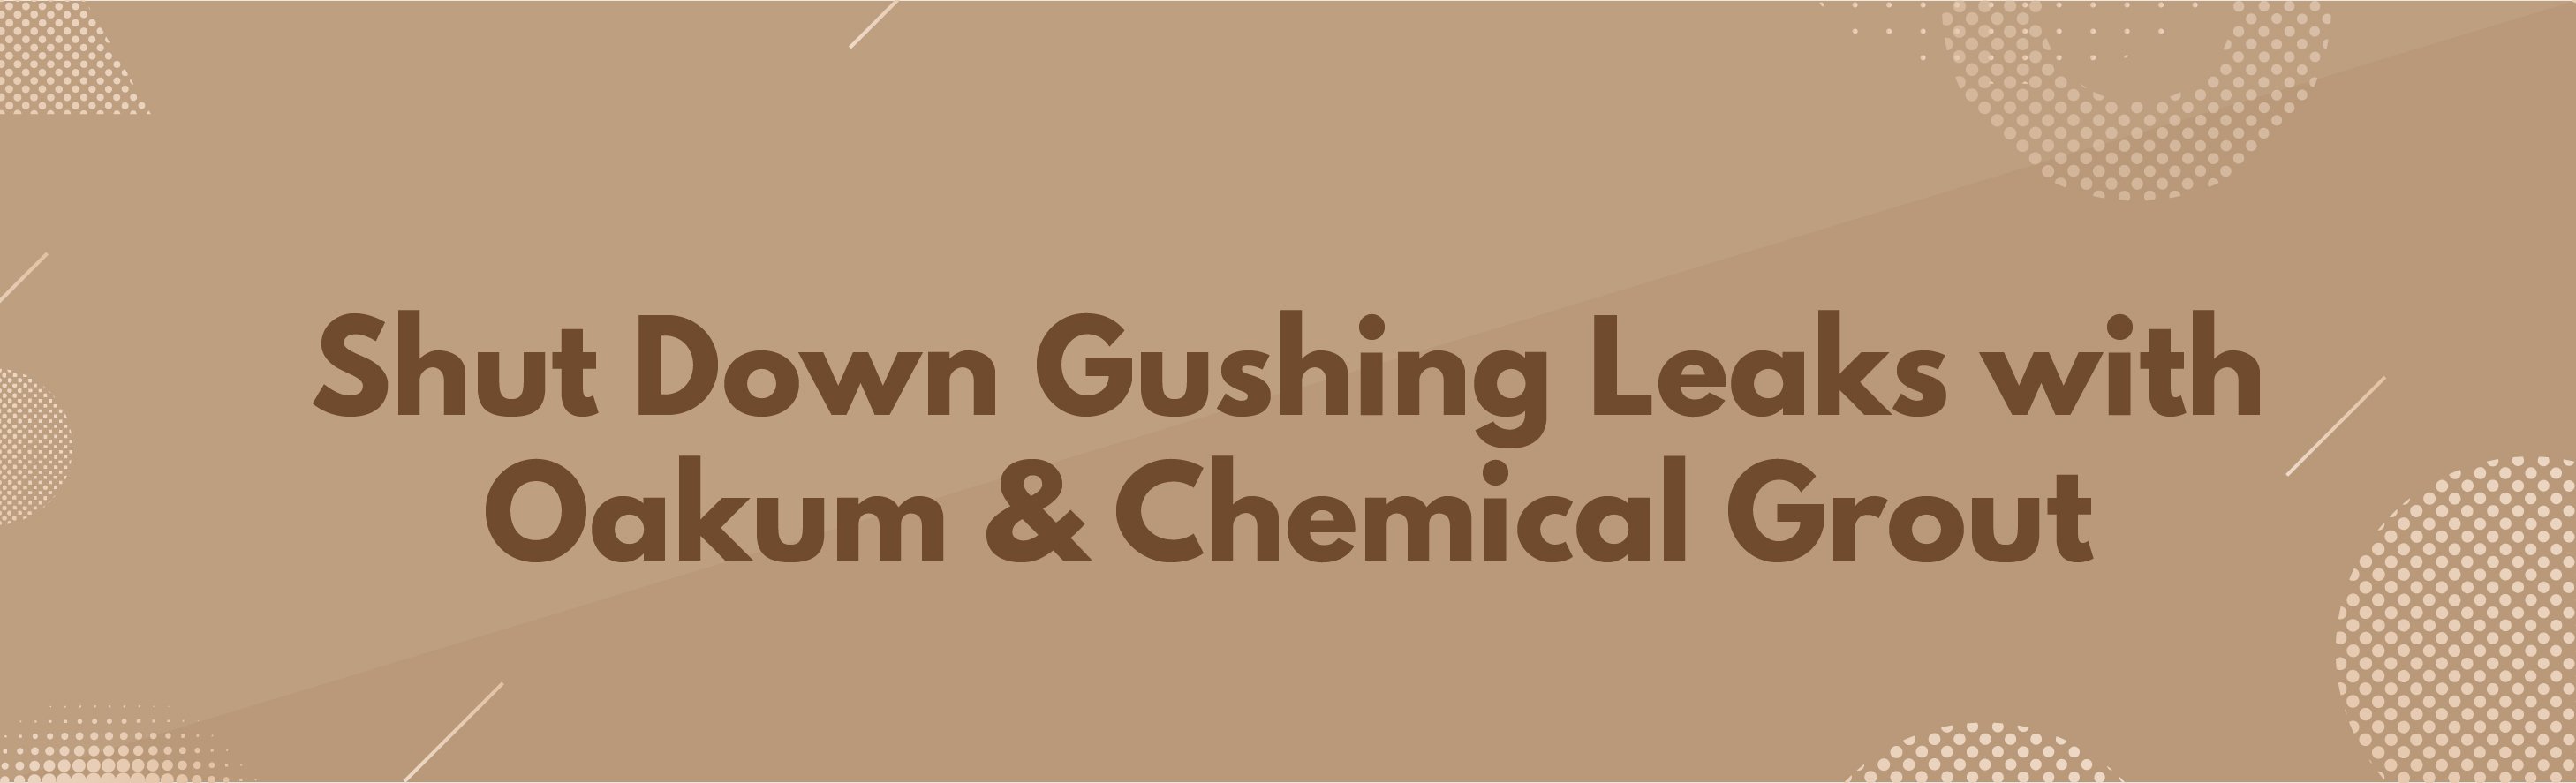 Banner2 - Shut Down Gushing Leaks with Oakum & Chemical Grout